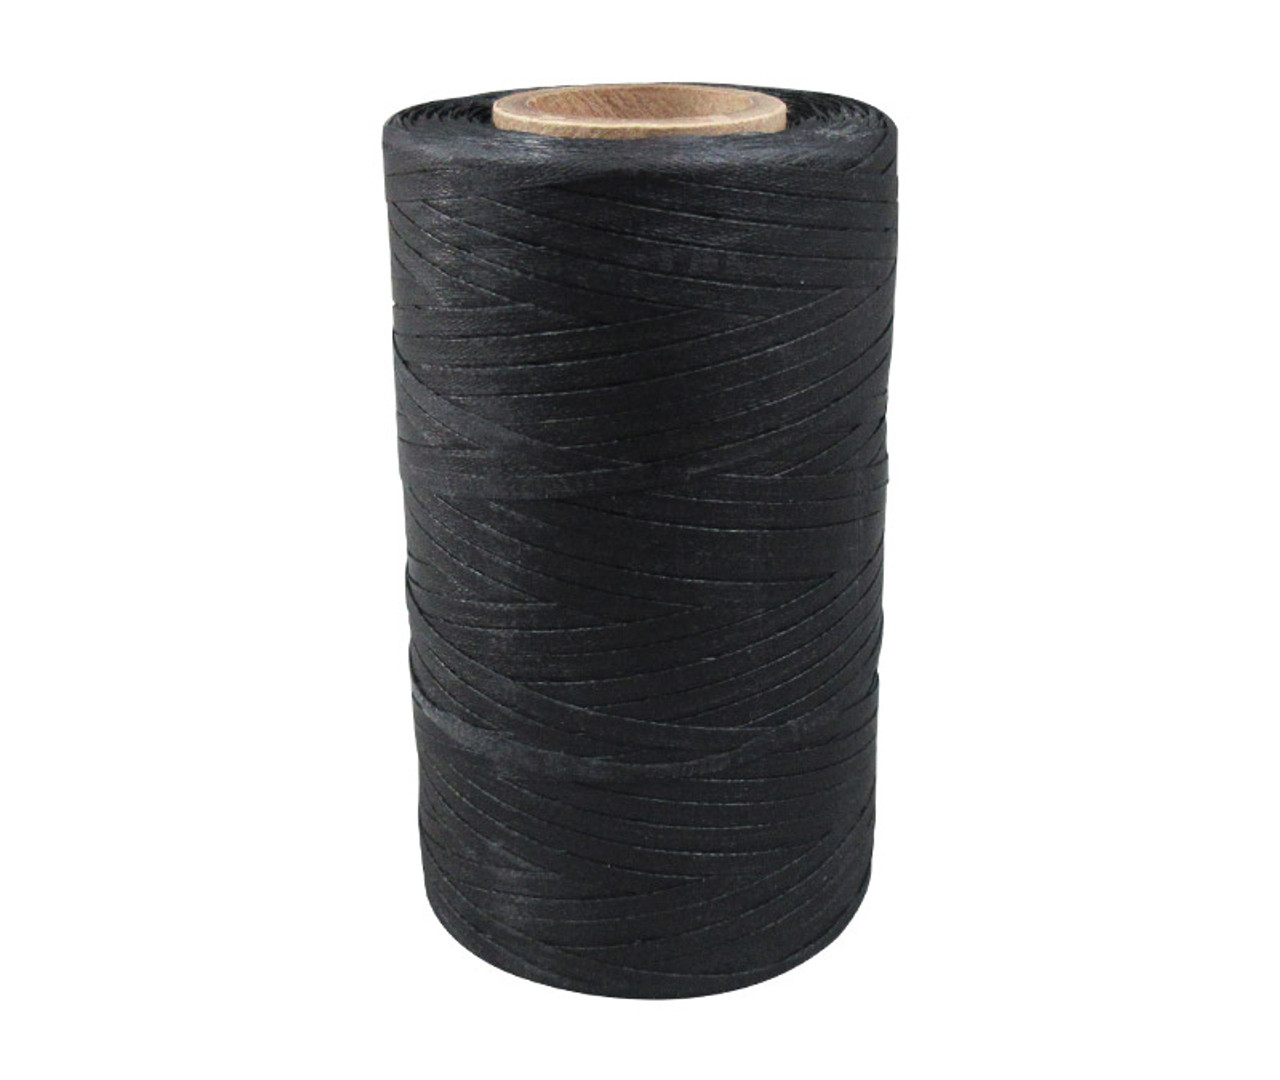 Military Specification A-A-52080-B-2 Black Nylon/Waxed Finish Tape, Lacing  & Tying Cord - 500 Yard Spool